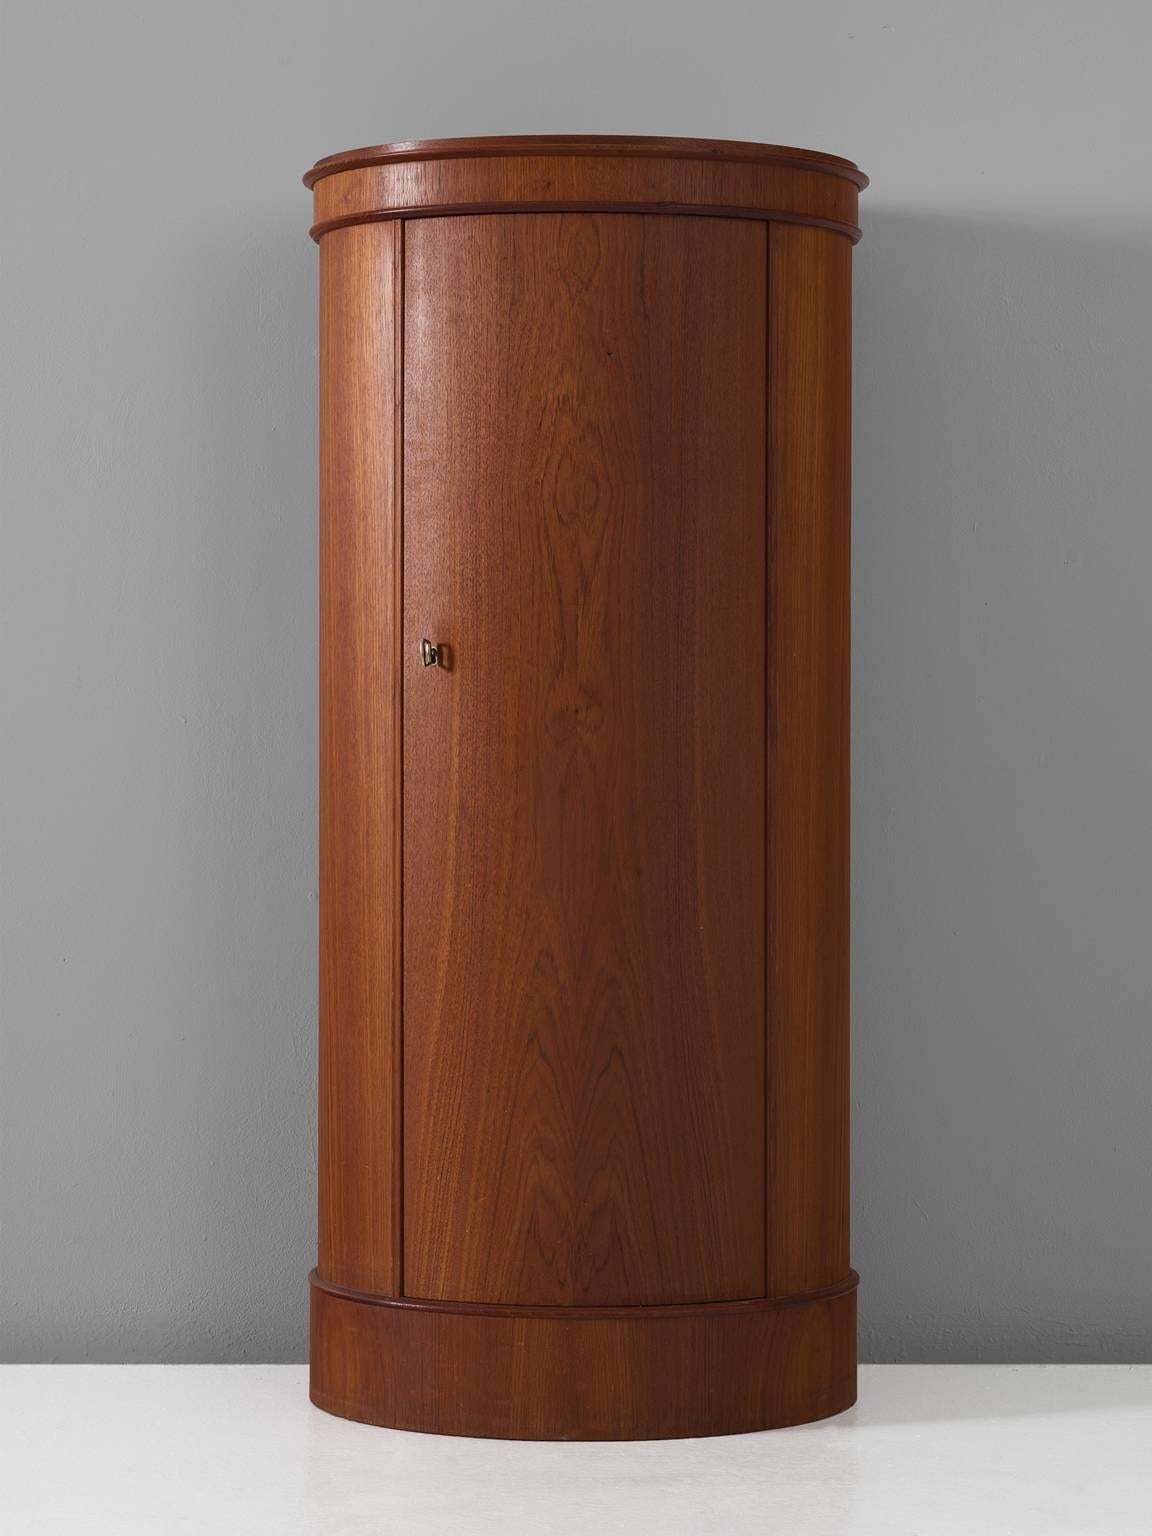 Chest with curved front, teak, 1960s, Denmark.

This small and slender teak cupboard has one door and five shelves. This piece is manufactured by Nexø Mobelfabrik in the 1960s and shows their craftsmanship. The bended door is executed to perfection.